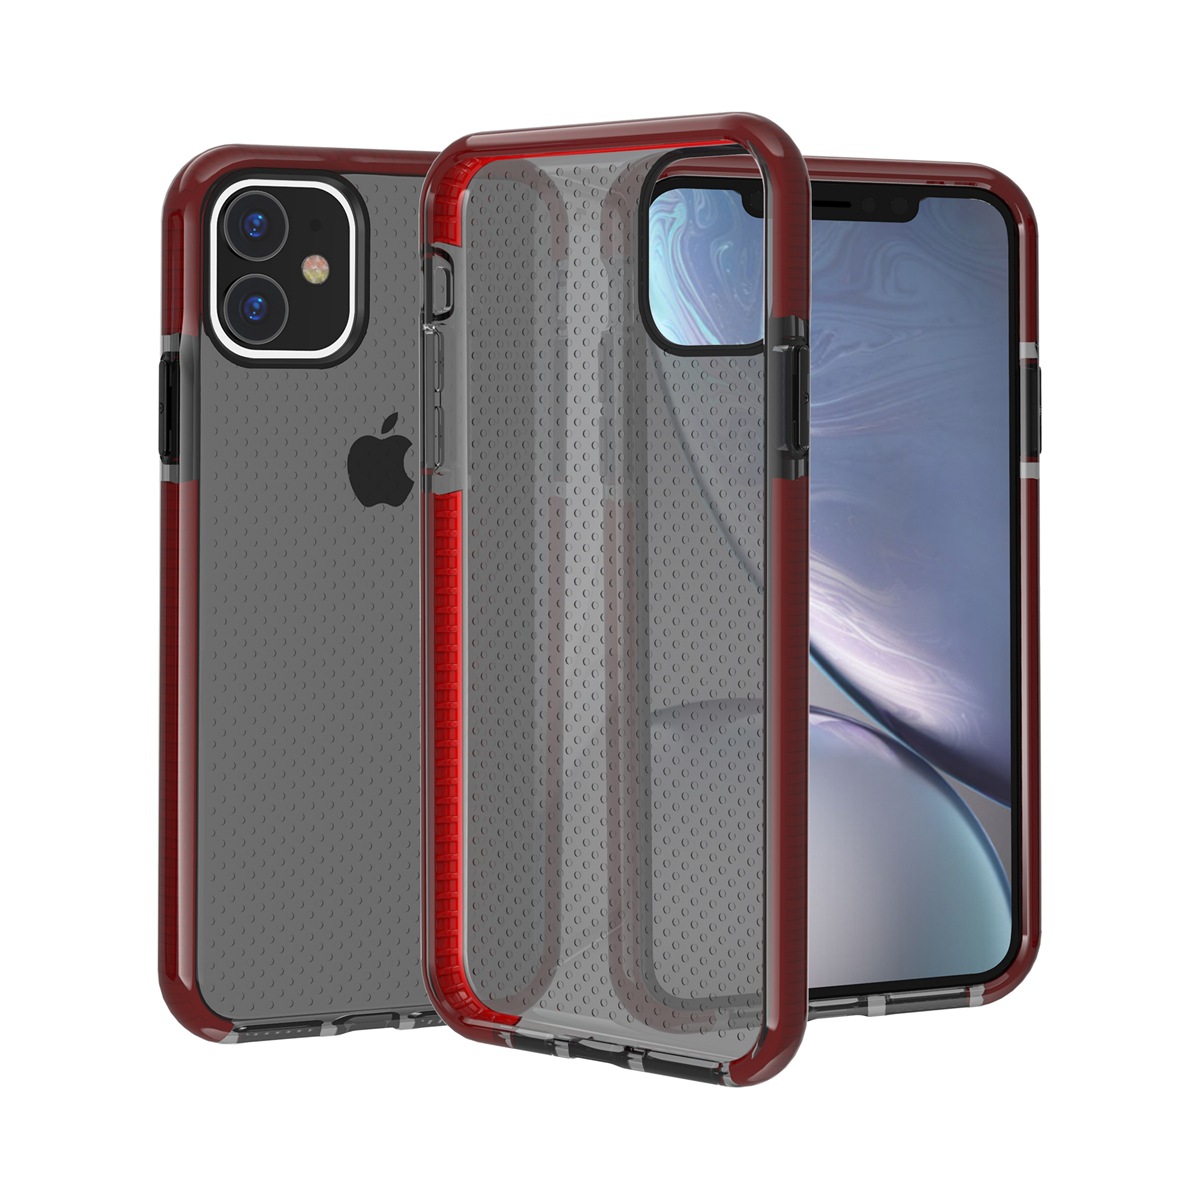 iPHONE 11 Pro (5.8in) Mesh Armor Hybrid Case (Red)